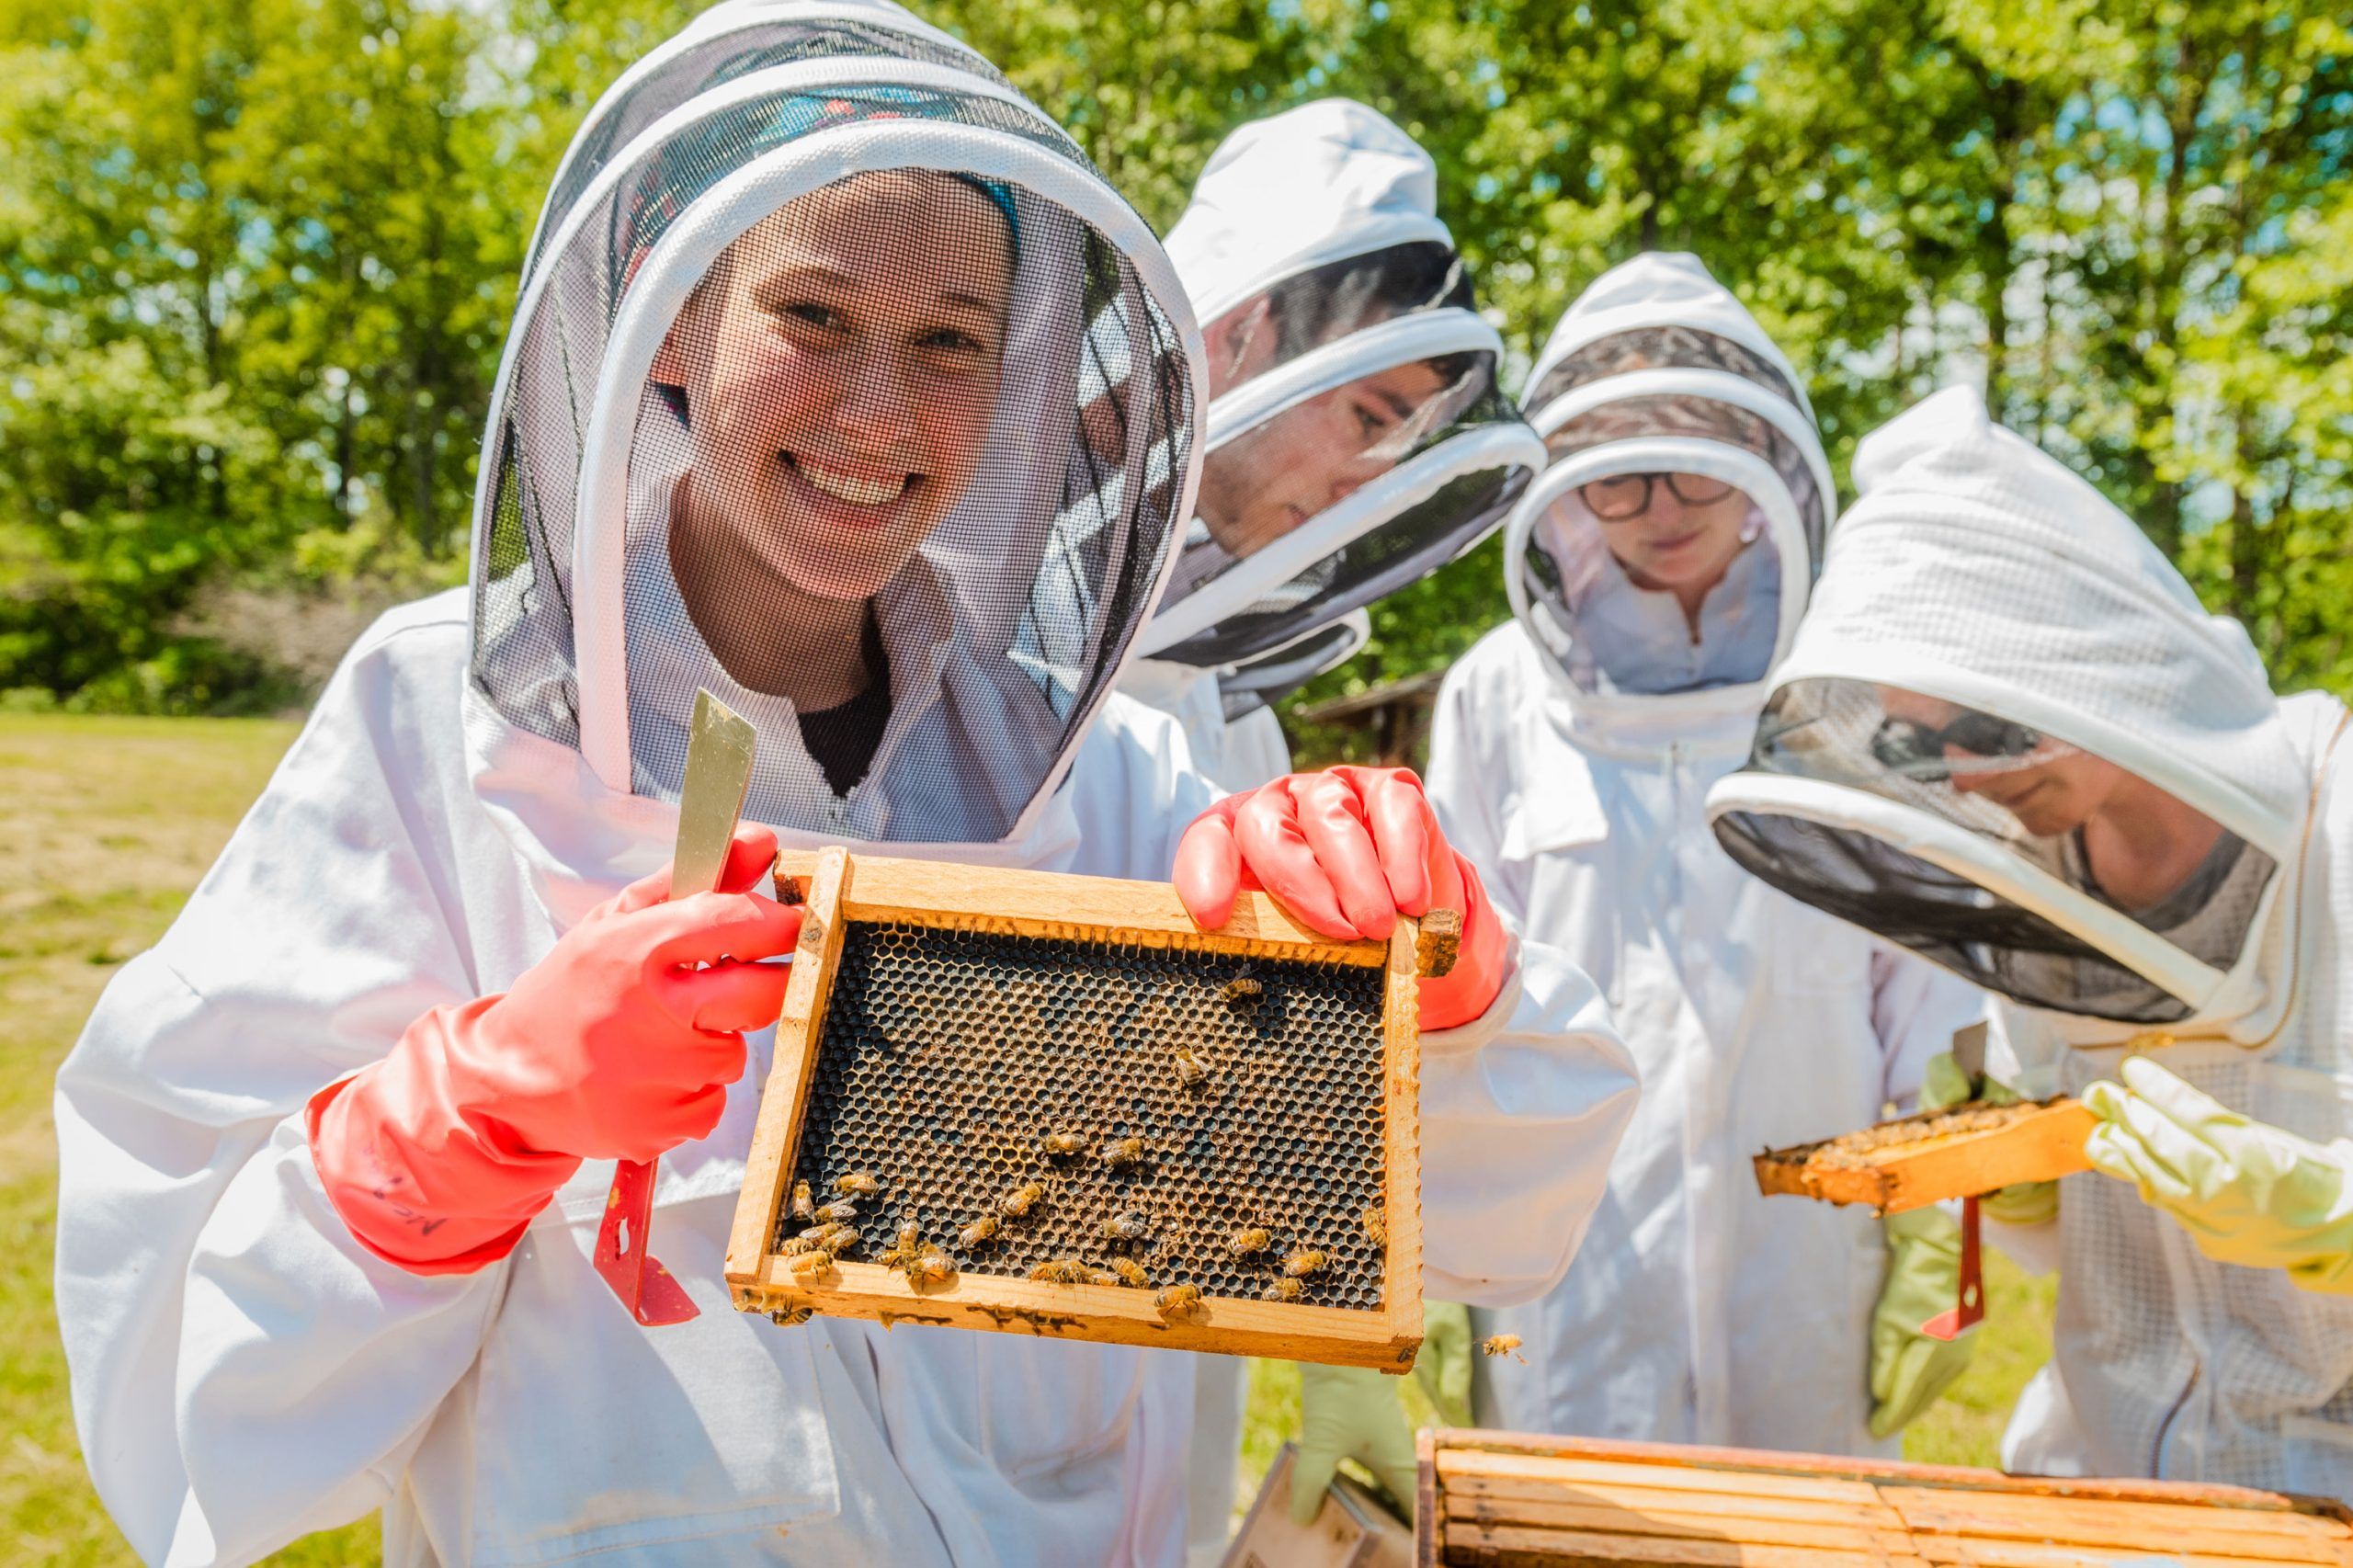 A person in beekeeping gear smiling while holding a honeycomb with bees